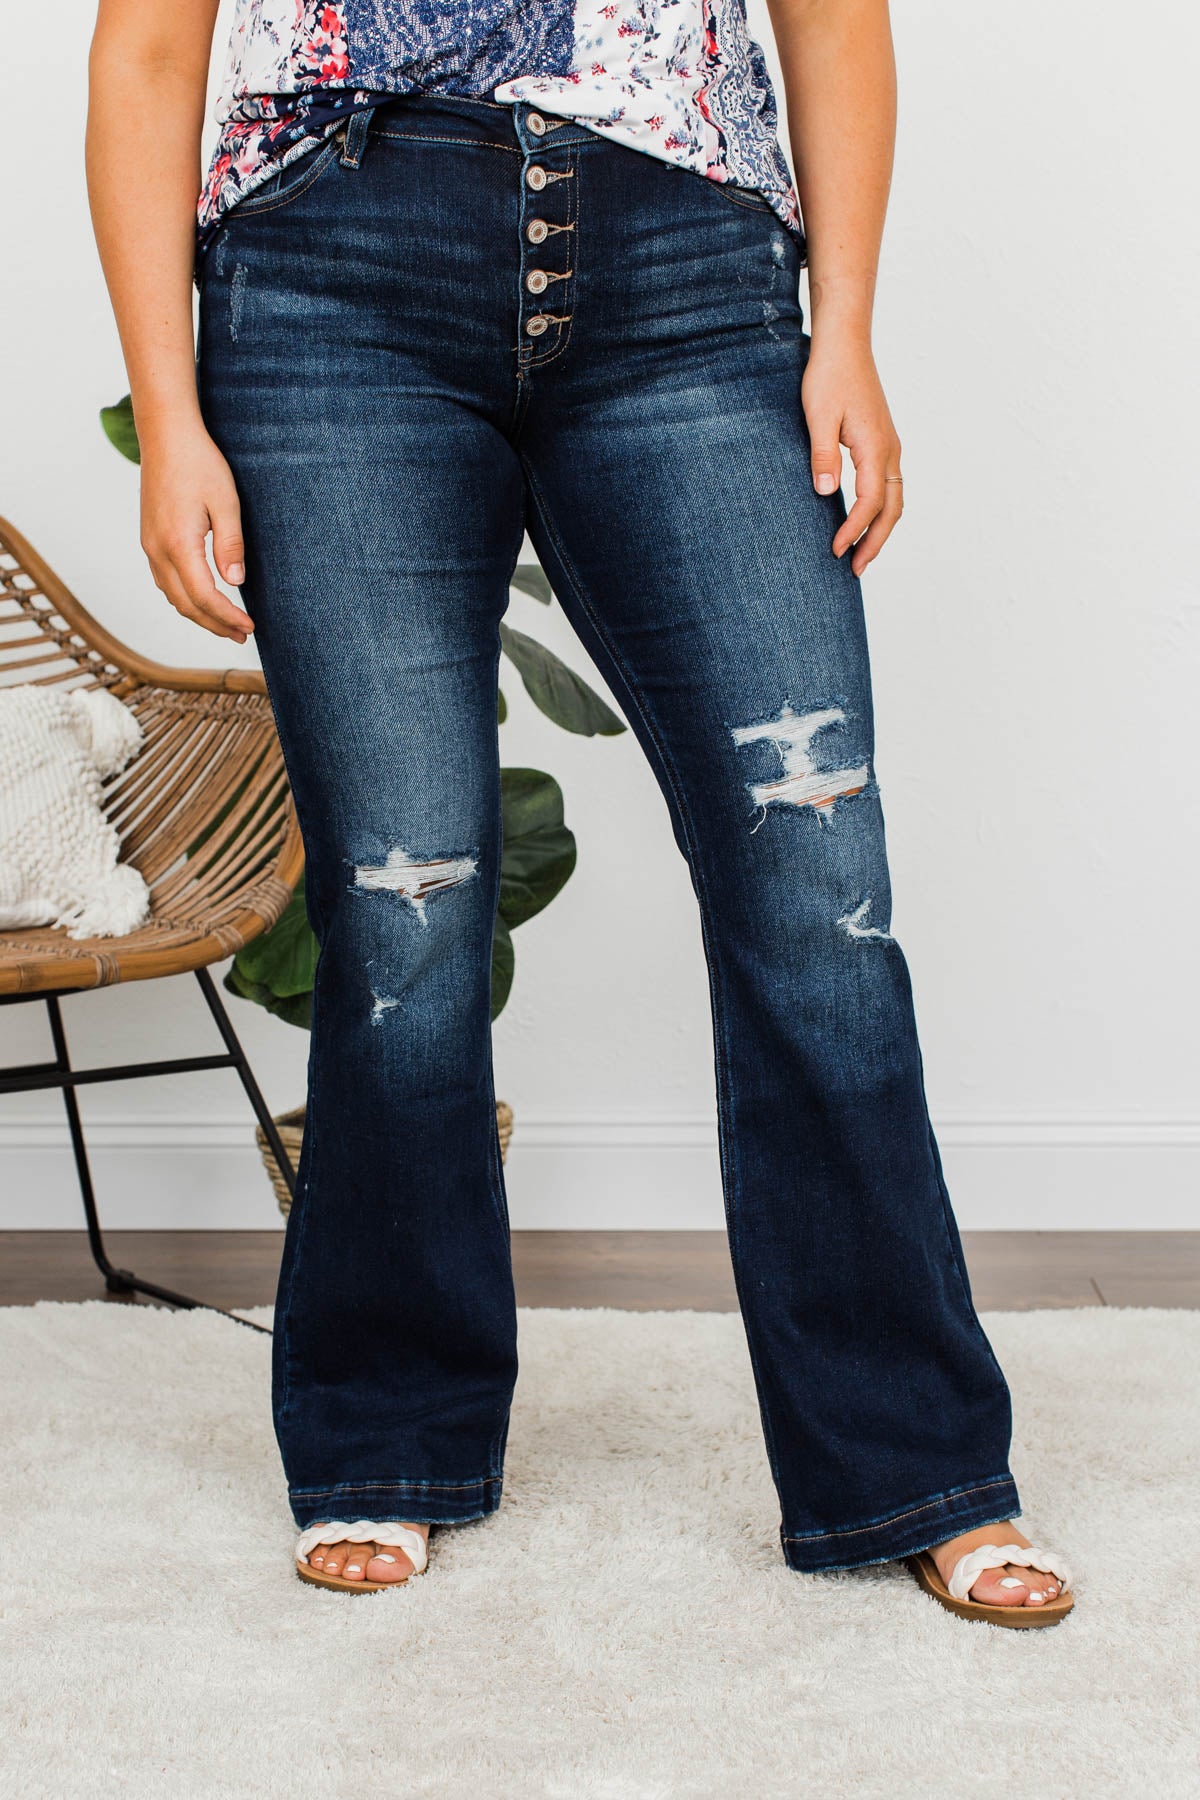 KanCan Petite Distressed Flare Jeans- Lenore Wash